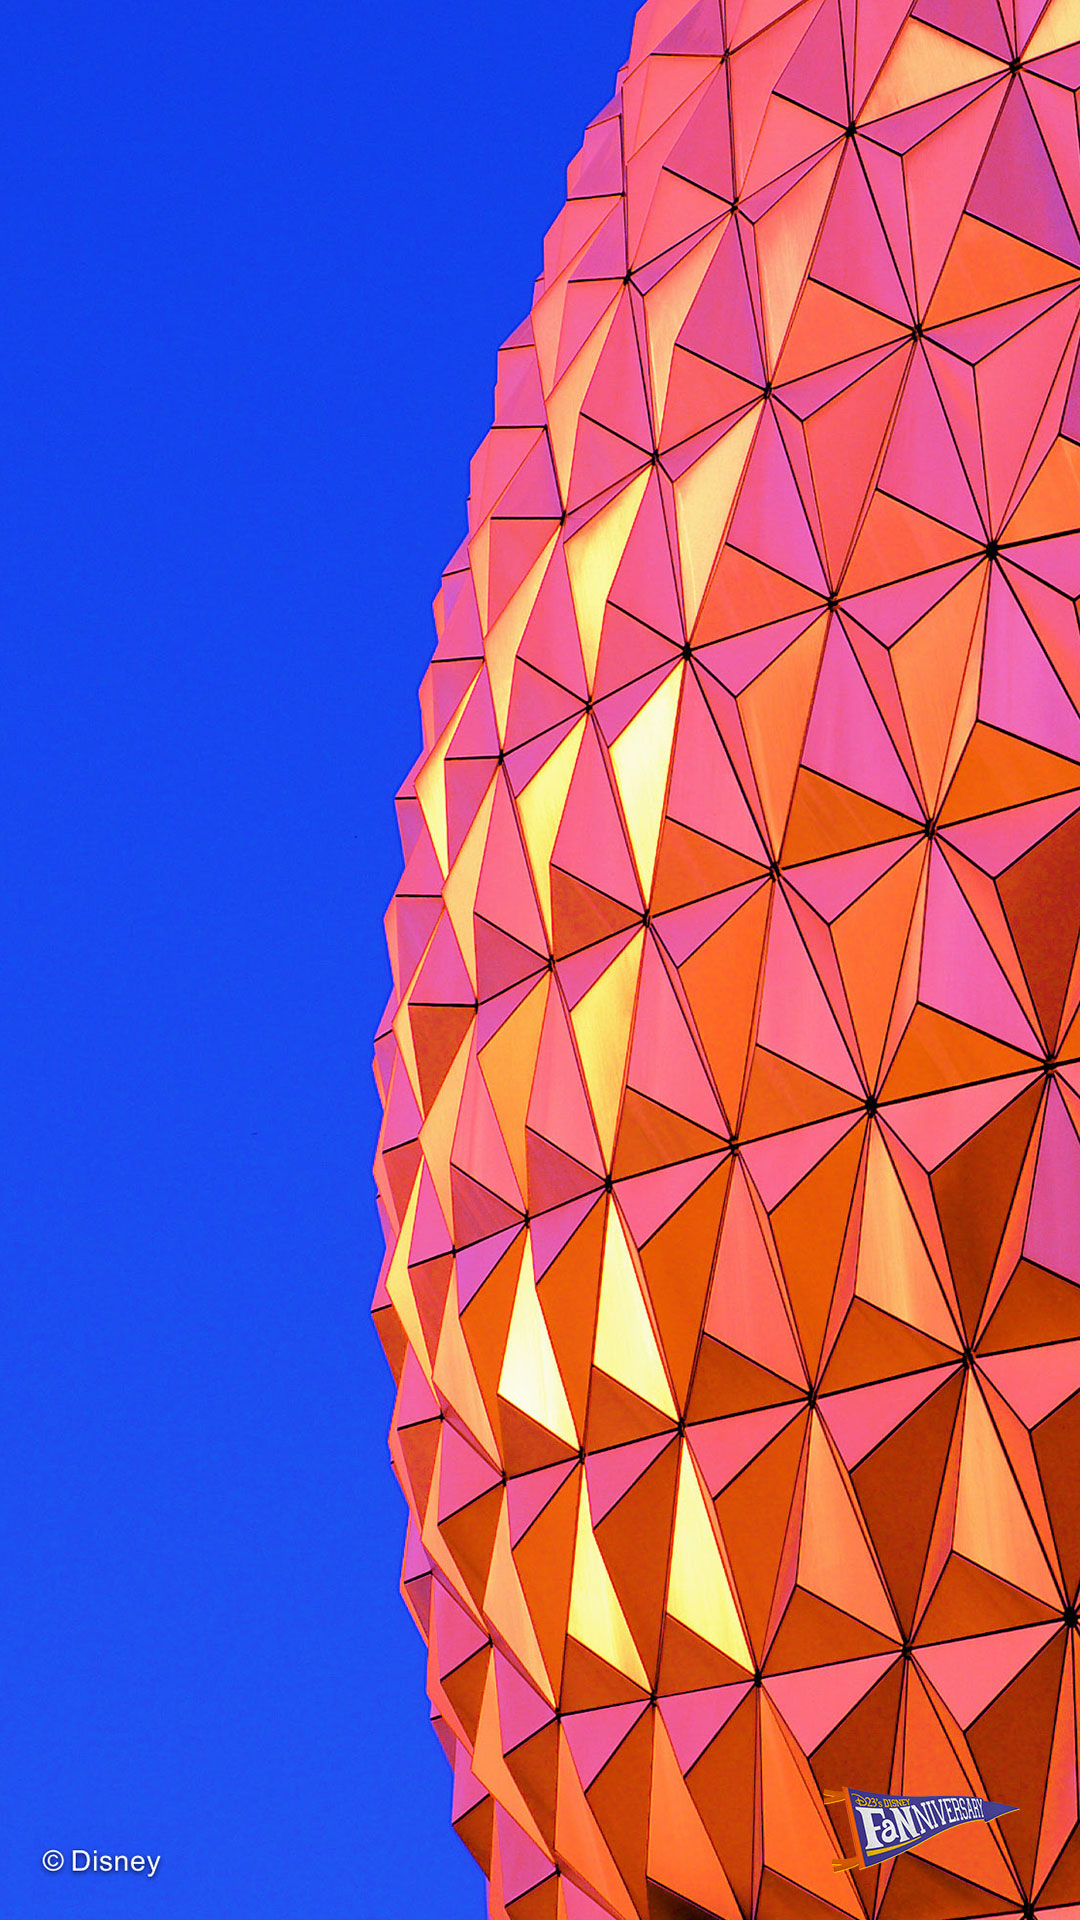 6 Dreamy Epcot Wallpapers for your Phone (or Desktop or Tablet!) - D23